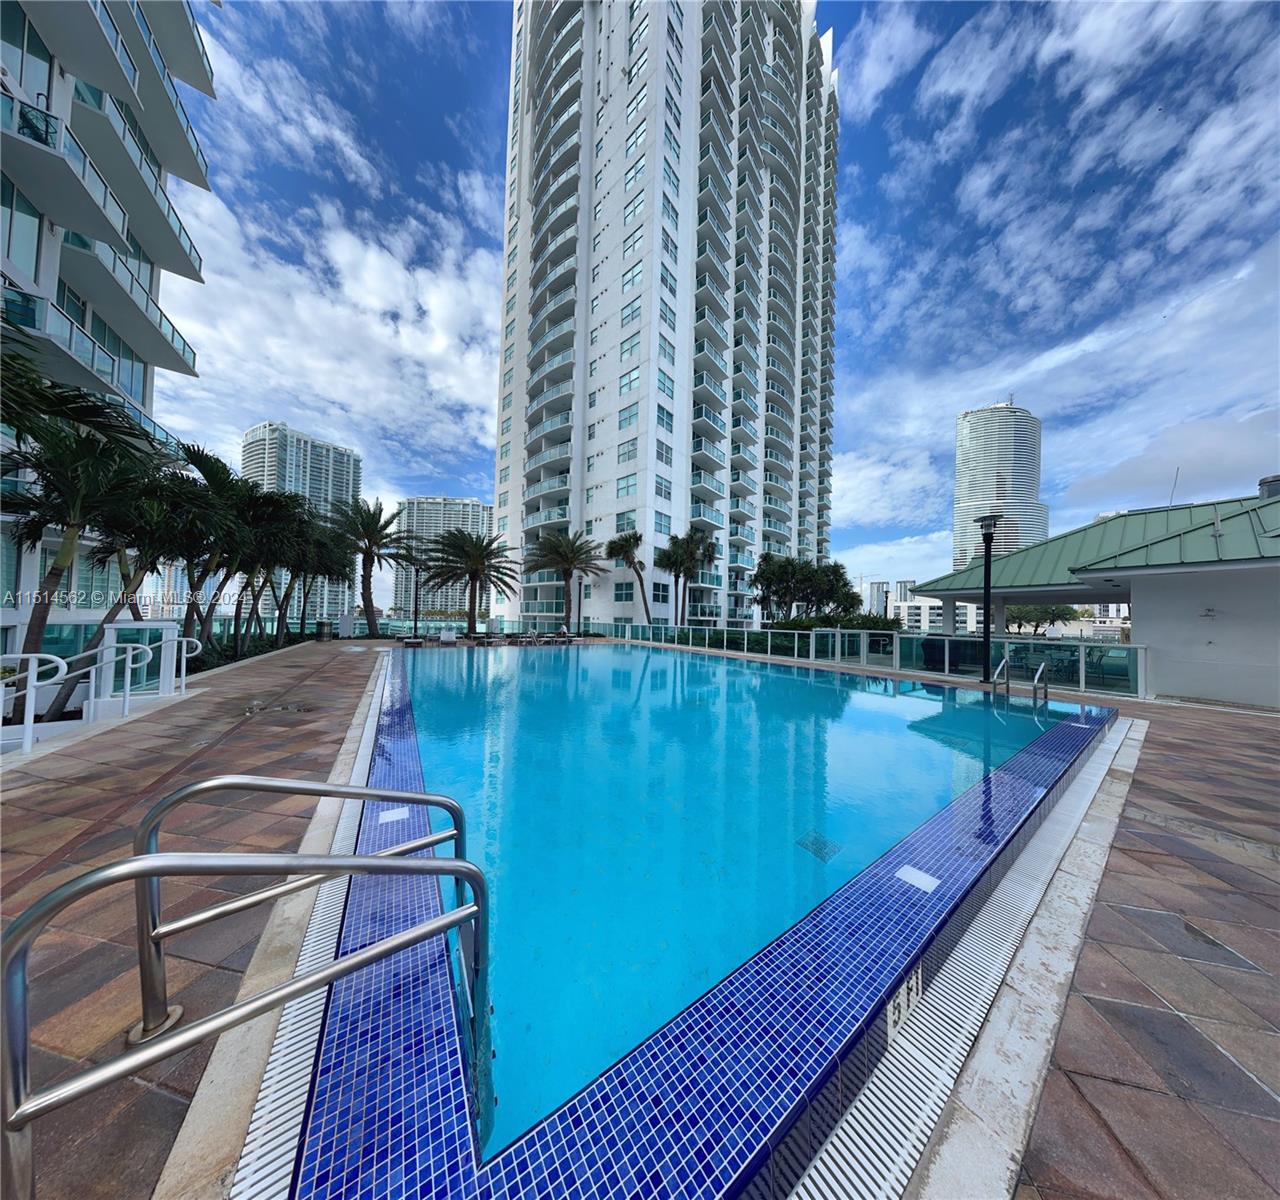 Brickell on the River North image #11